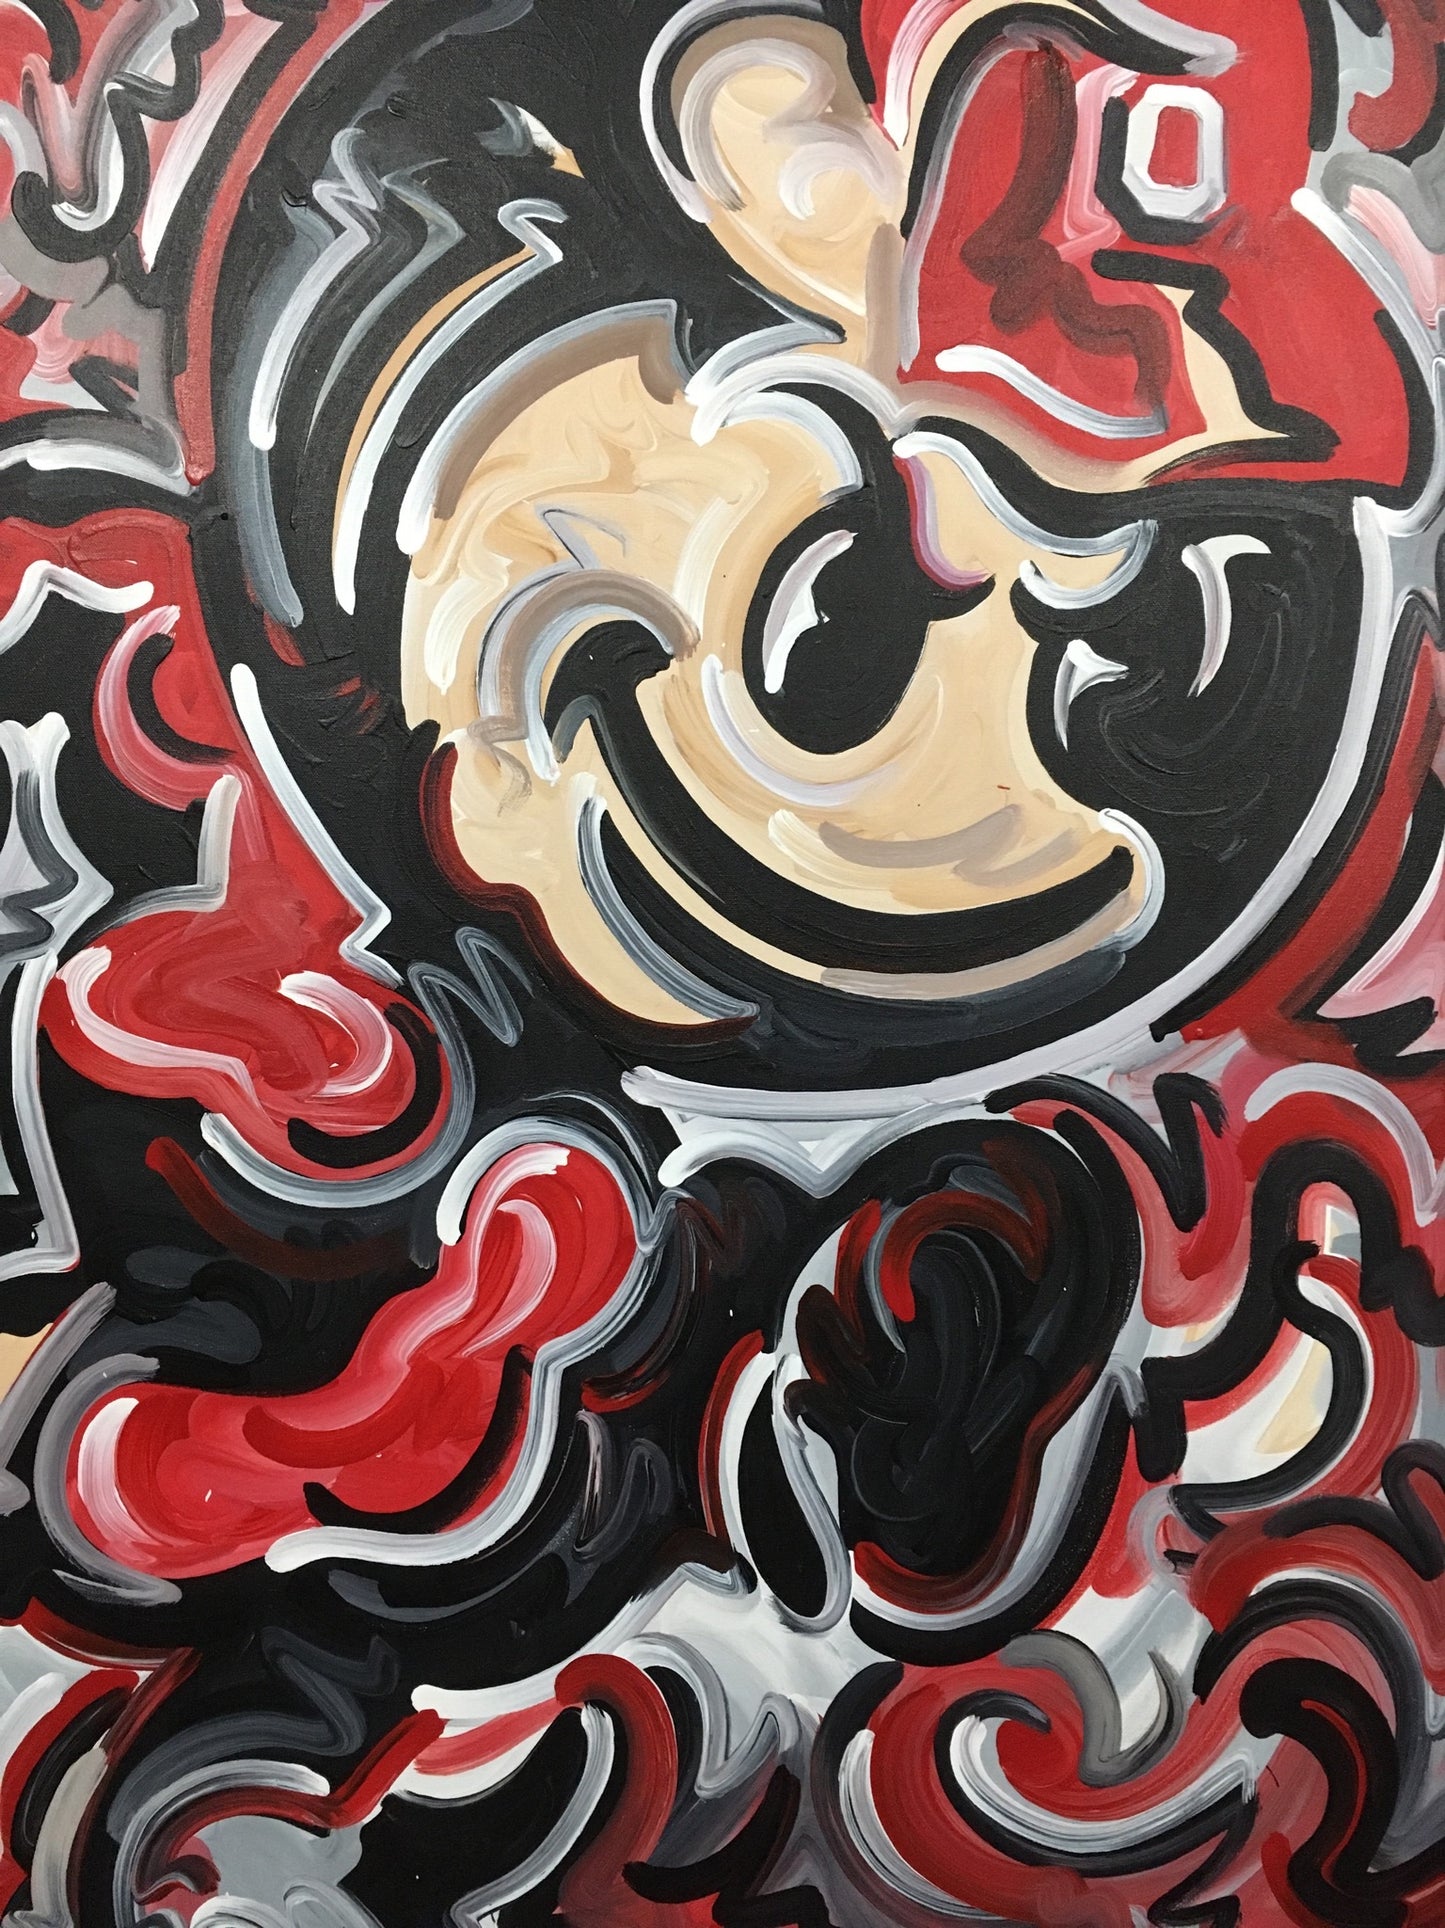 The Ohio State University Brutus Painting by Justin Patten